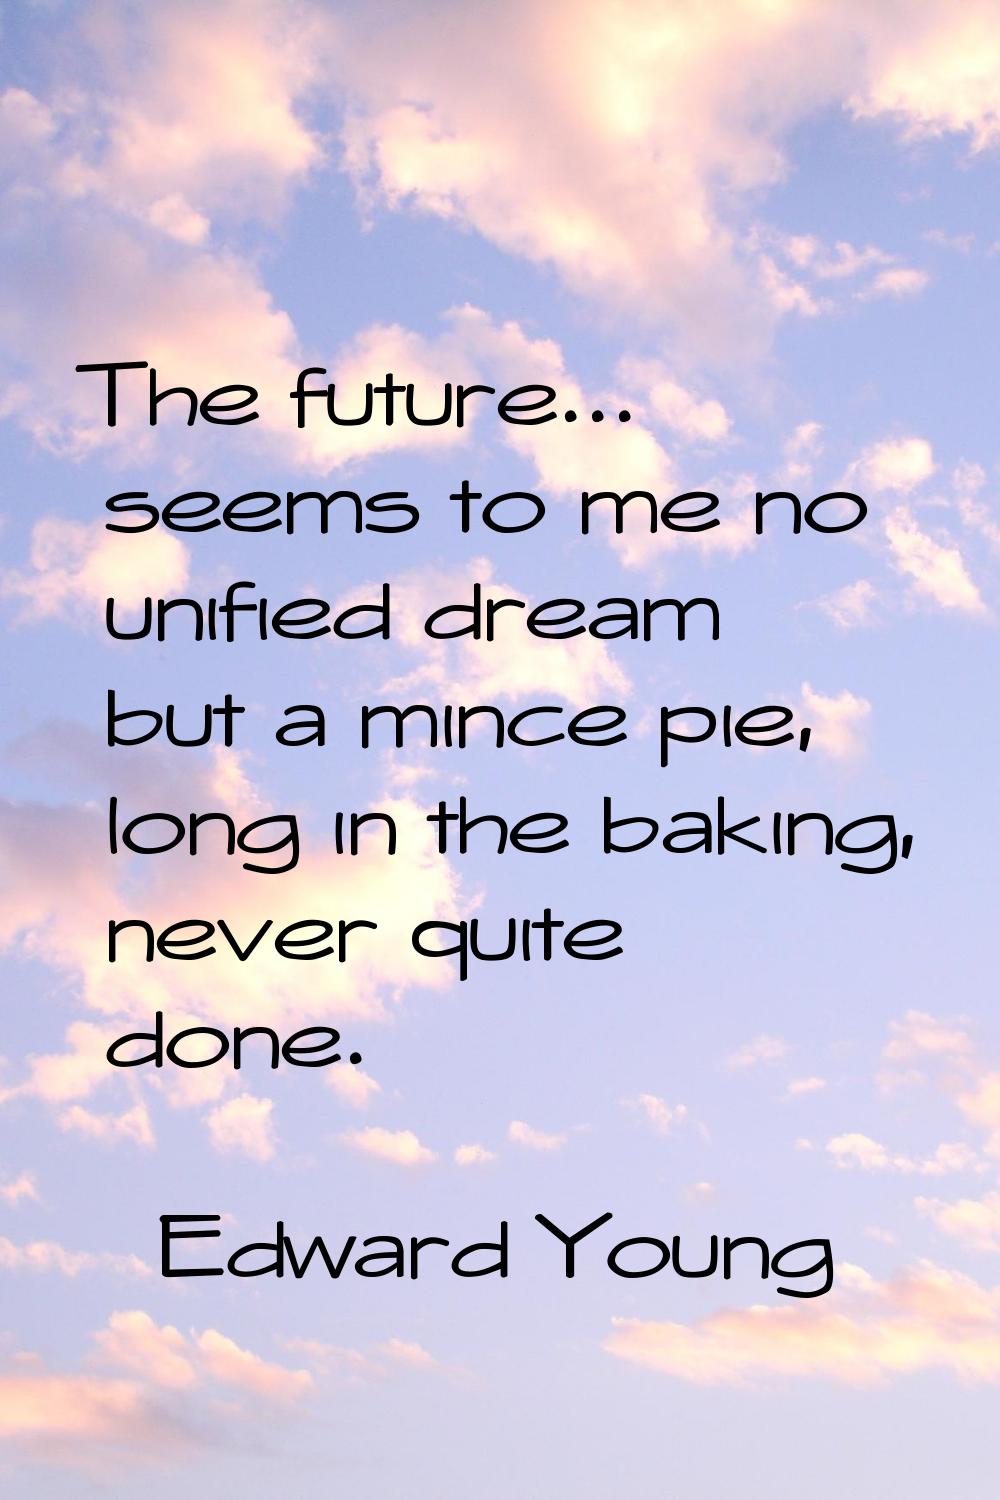 The future... seems to me no unified dream but a mince pie, long in the baking, never quite done.